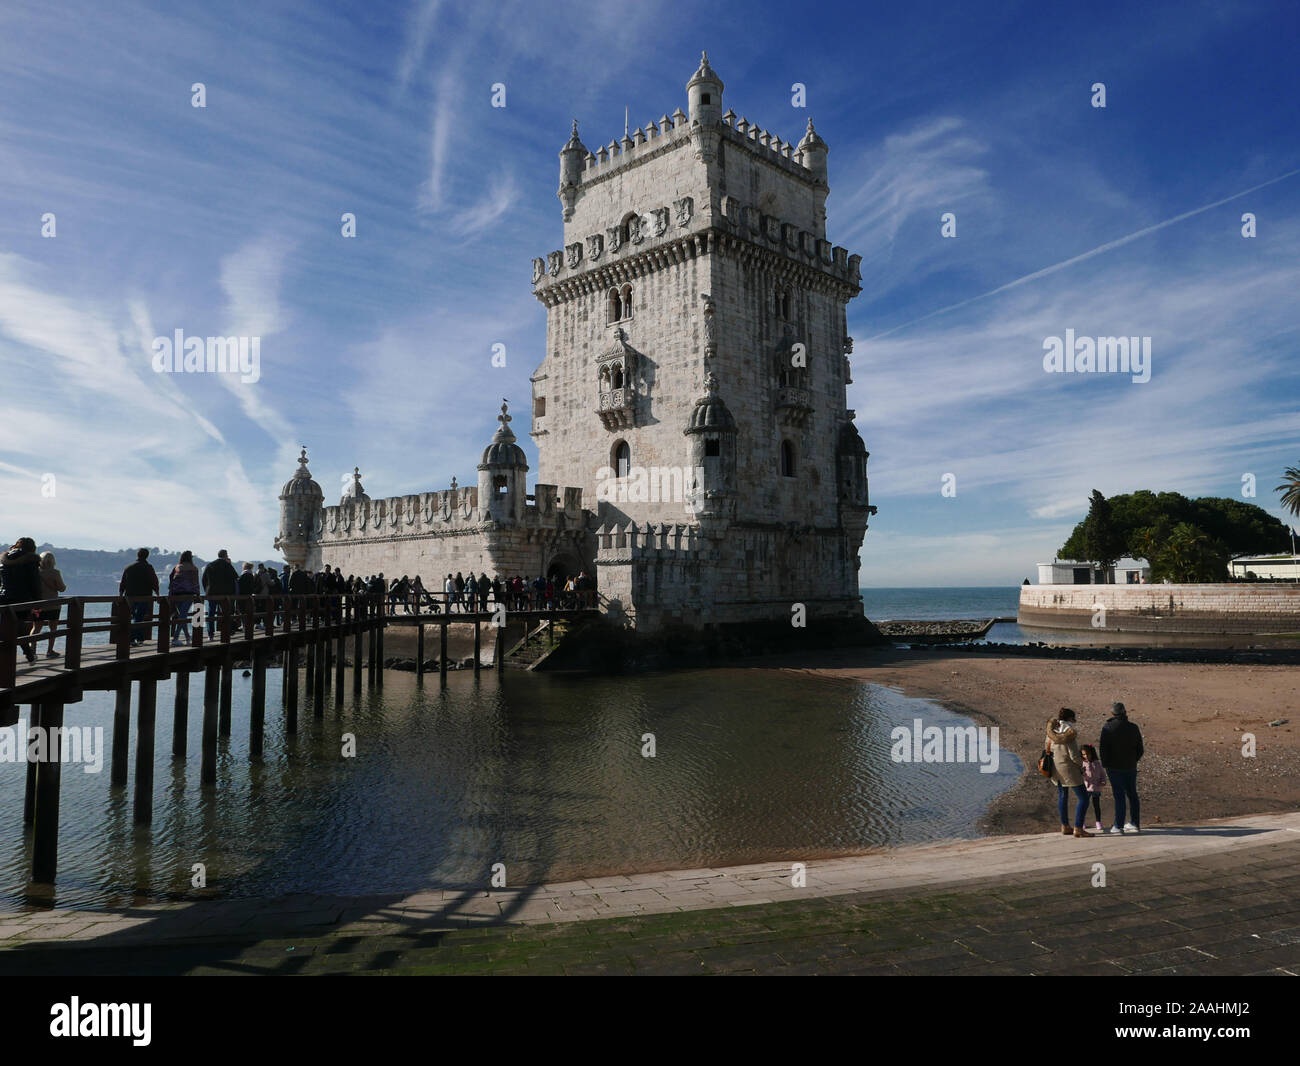 The Belem Tower on the River Tagus in Lisbon Portugal in December with blue sky and some light cloud trails Stock Photo